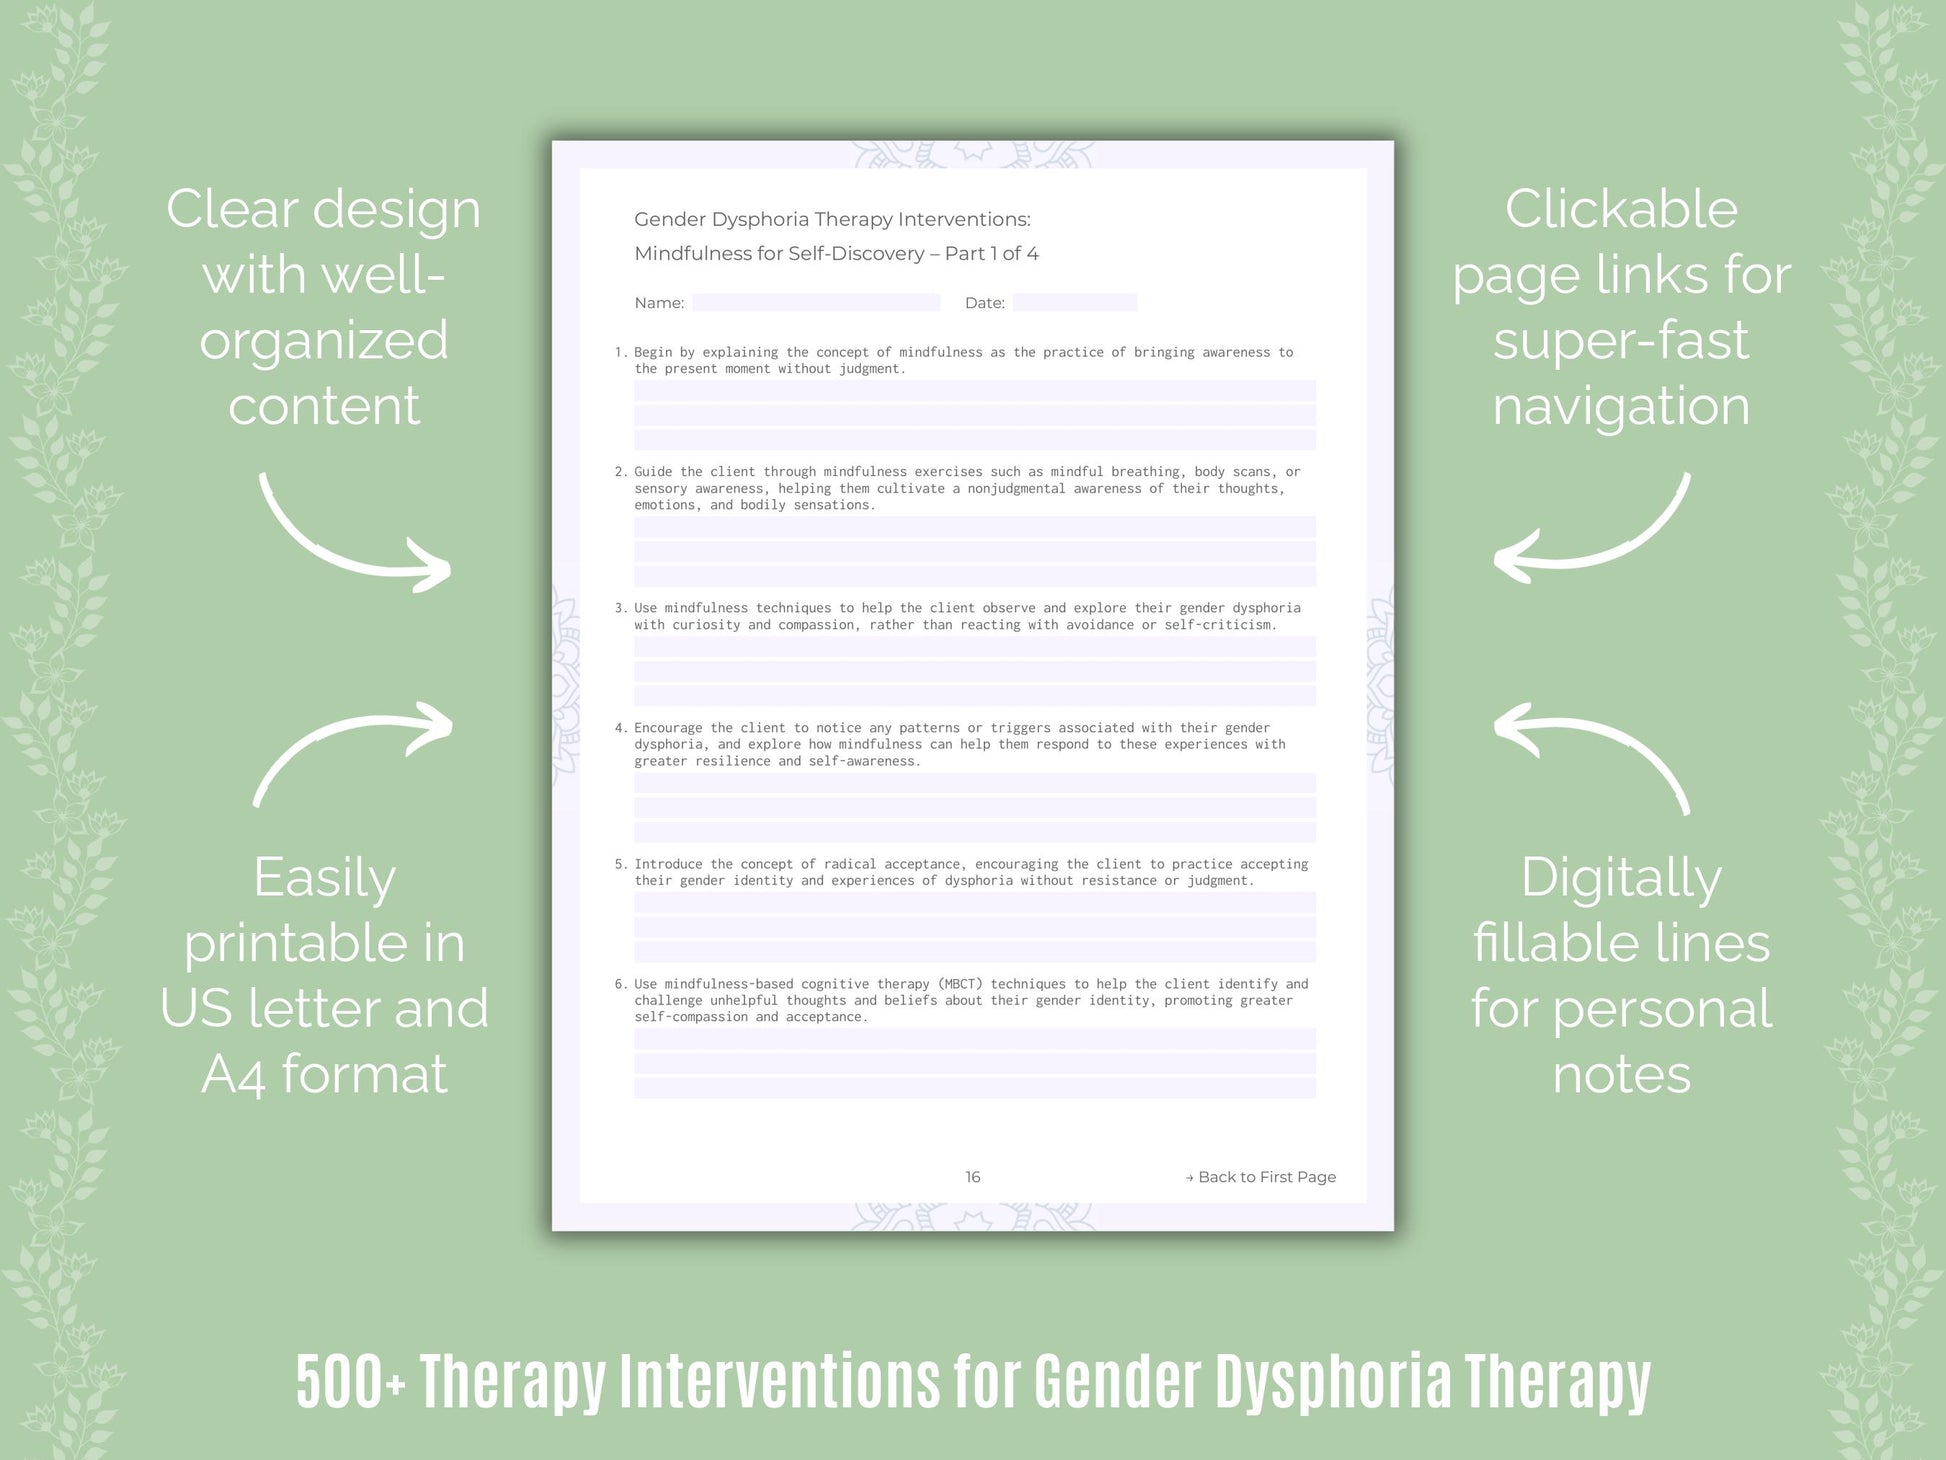 Gender Dysphoria Therapy